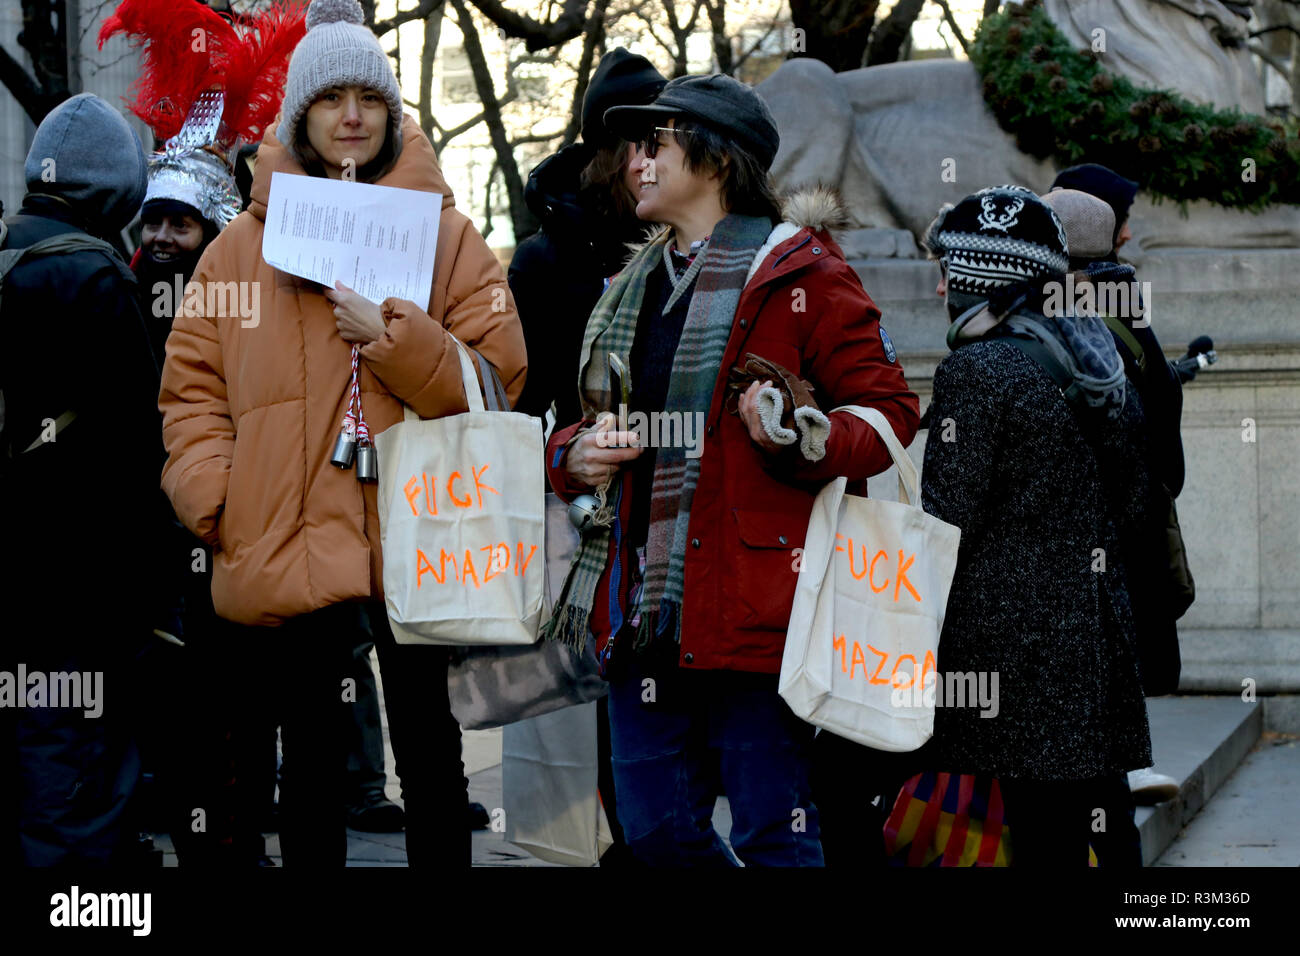 New York, NY, USA. 23 Nov., 2018. Continued opposition to online retailer Amazon second headquarters (HQ2) in Long Island City was staged on 23 November 2018, against the on-line retail giant forthcoming presence in New York City. Activists gathered at the NY public library in Manhattan and marched to the retailer bookstore in Herald Square, singing Christmas carols and handing out fliers. © 2018 G. Ronald Lopez/DigiPixsAgain.us/AlamyLive News Stock Photo